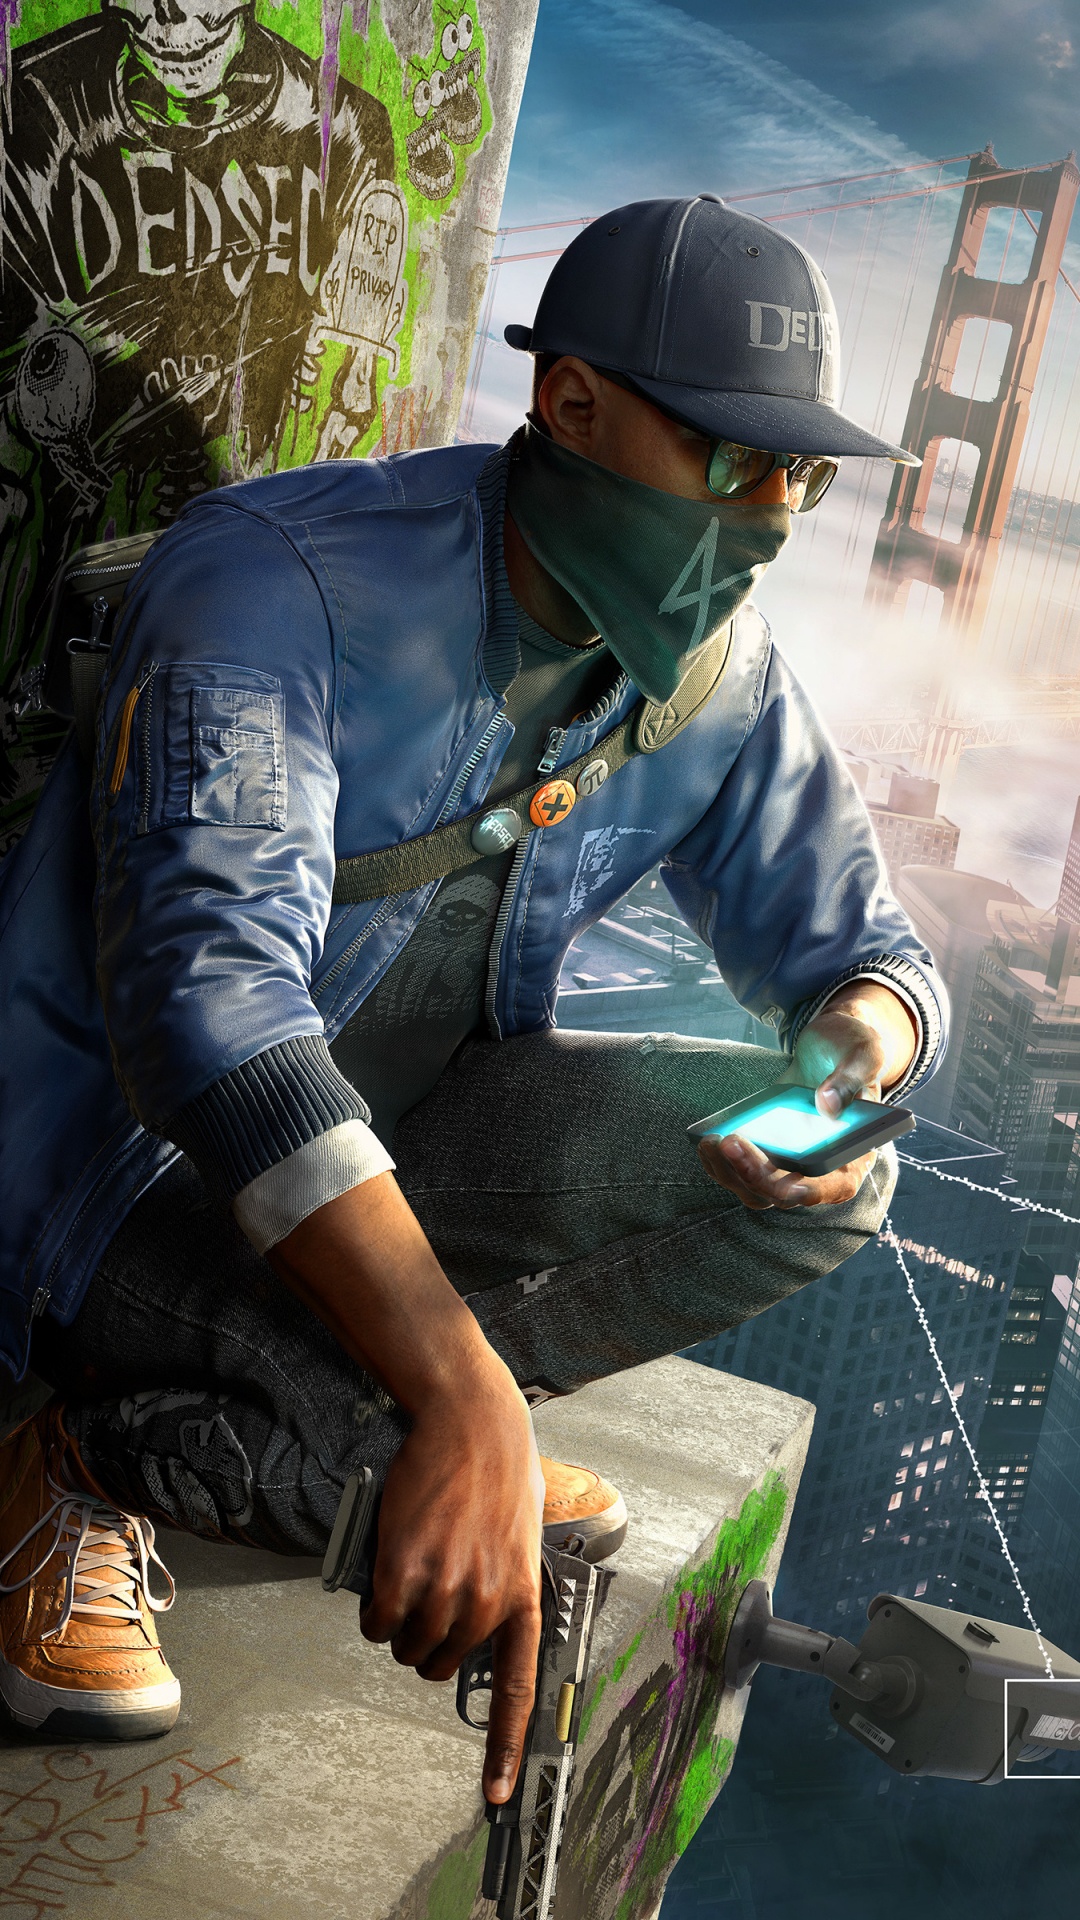 Watch Dogs 2, Watch Dogs, Ubisoft, Playstation 4, Juego de Pc. Wallpaper in 1080x1920 Resolution